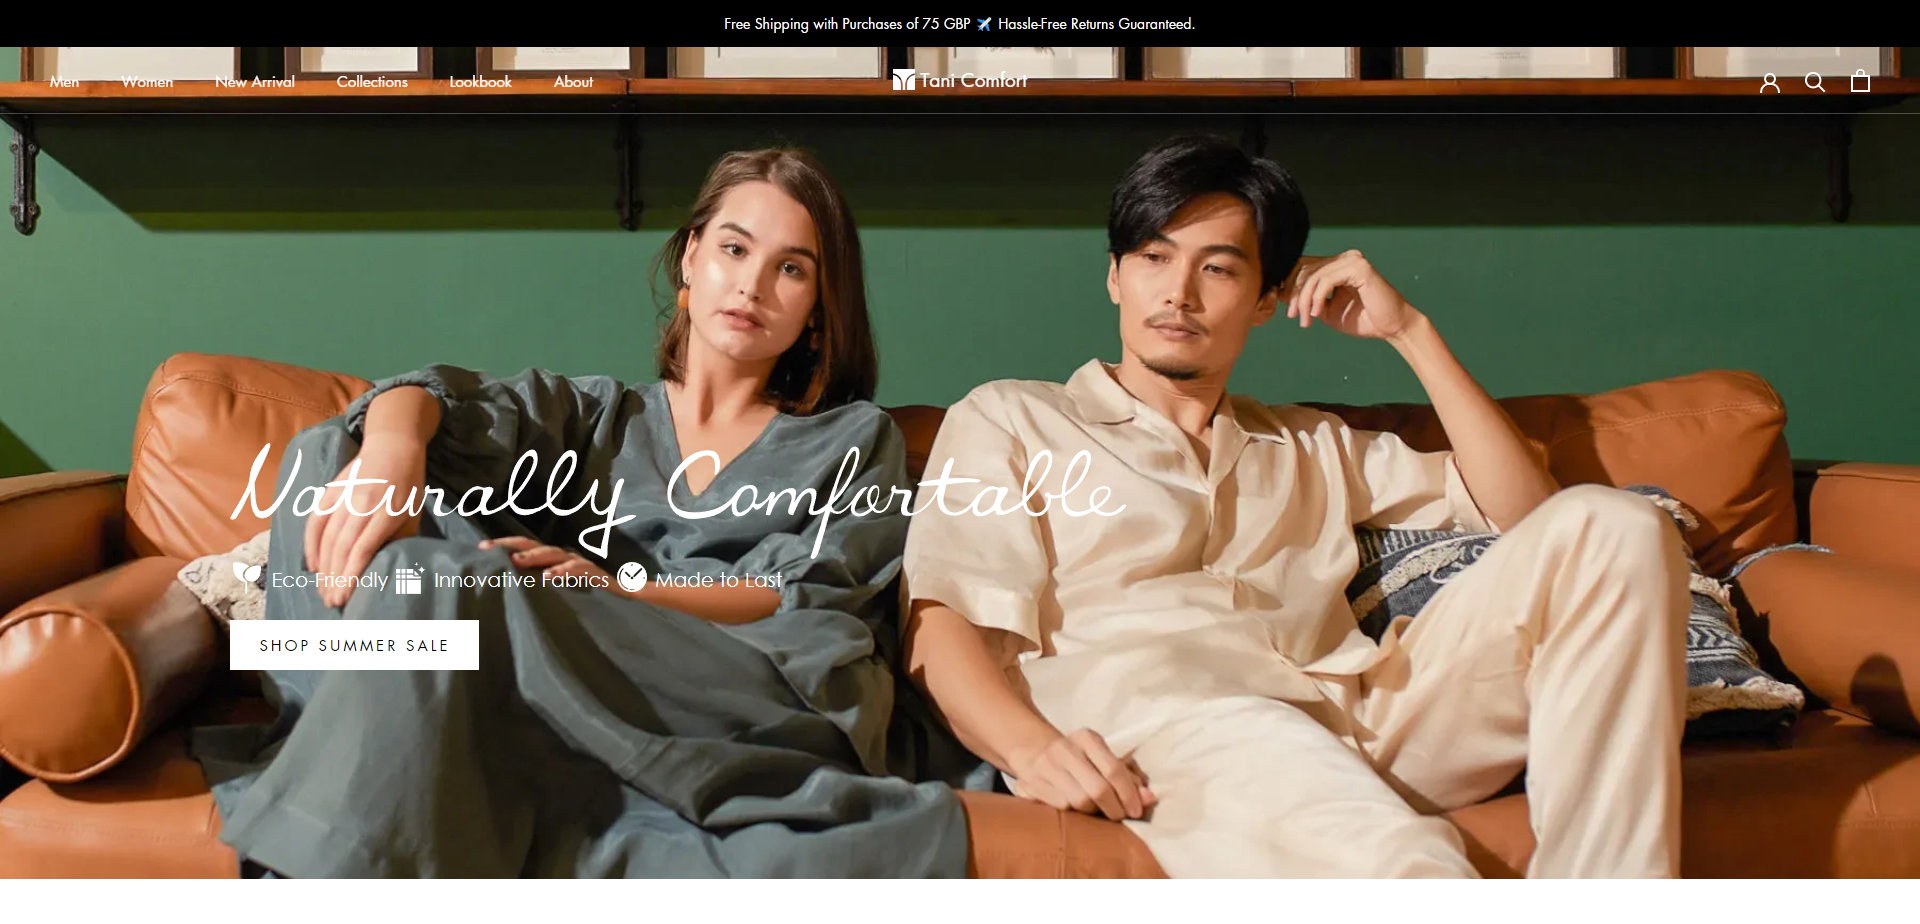 Landing Page for Tani Comforts